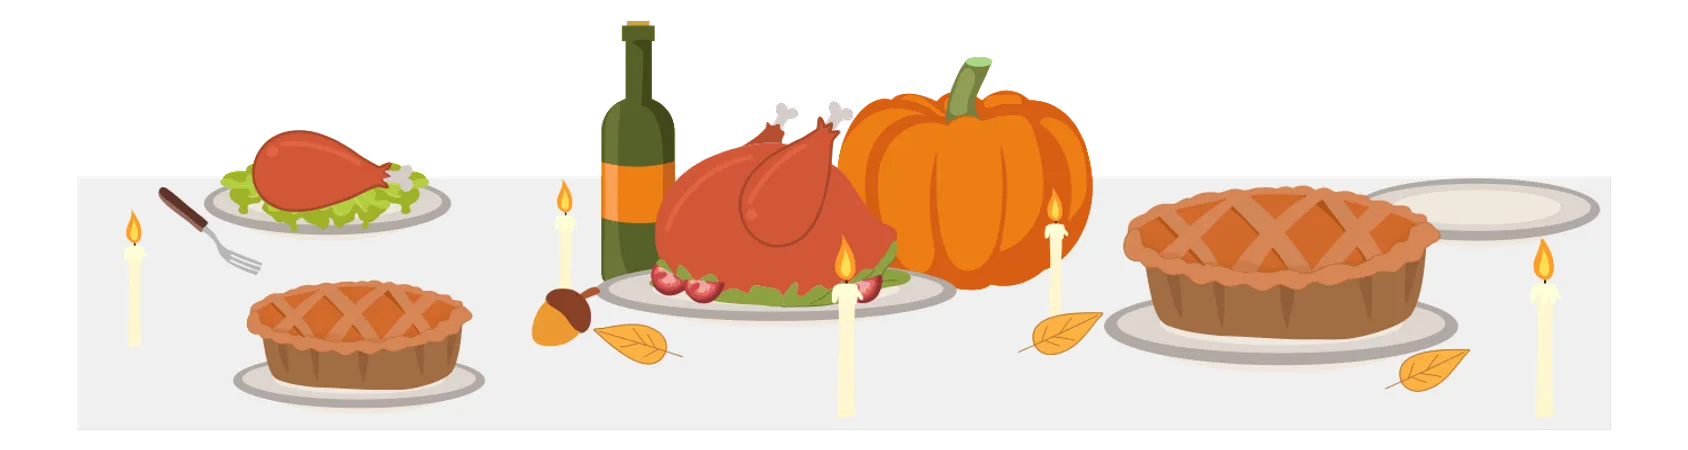 Thanksgiving Feast Table Decorated With Delicious Food Autumn Harvest Thanksgiving Table Illustration